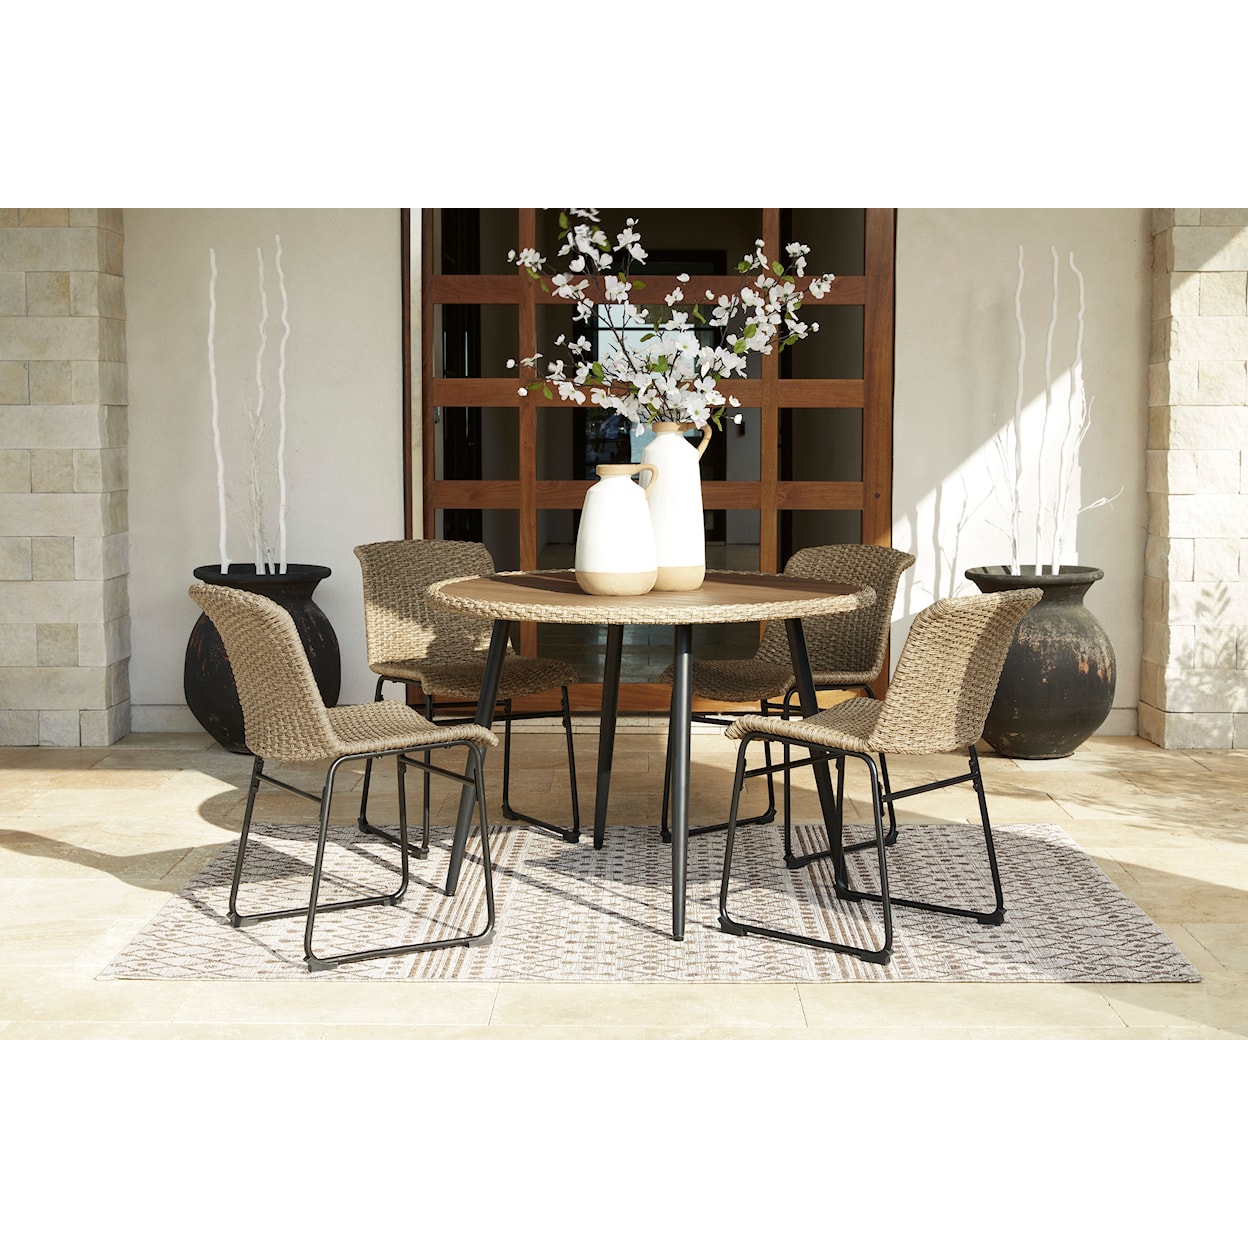 Benchcraft Amaris Outdoor Dining Table